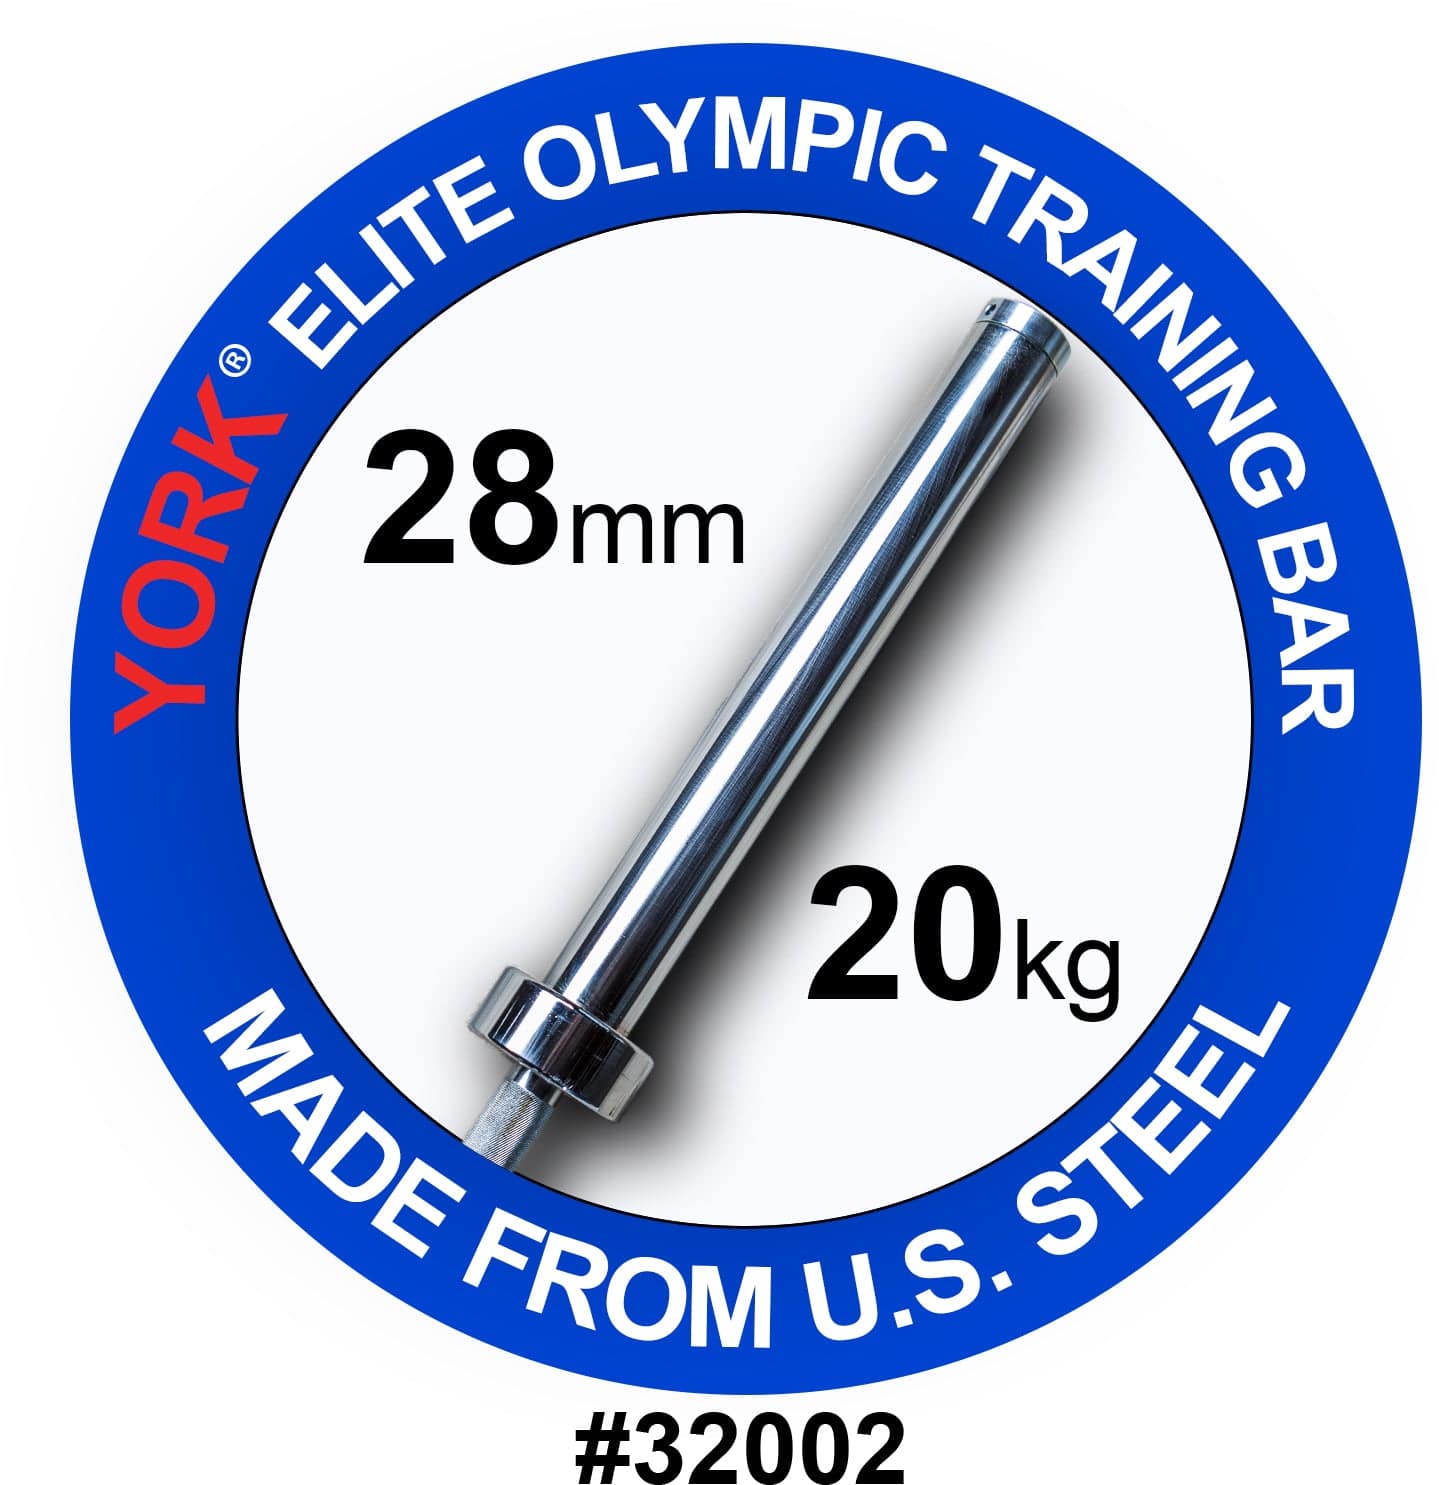 York Barbell | Men's Elite Training Bar - 28mm - XTC Fitness - Exercise Equipment Superstore - Canada - Olympic Lifting Barbell